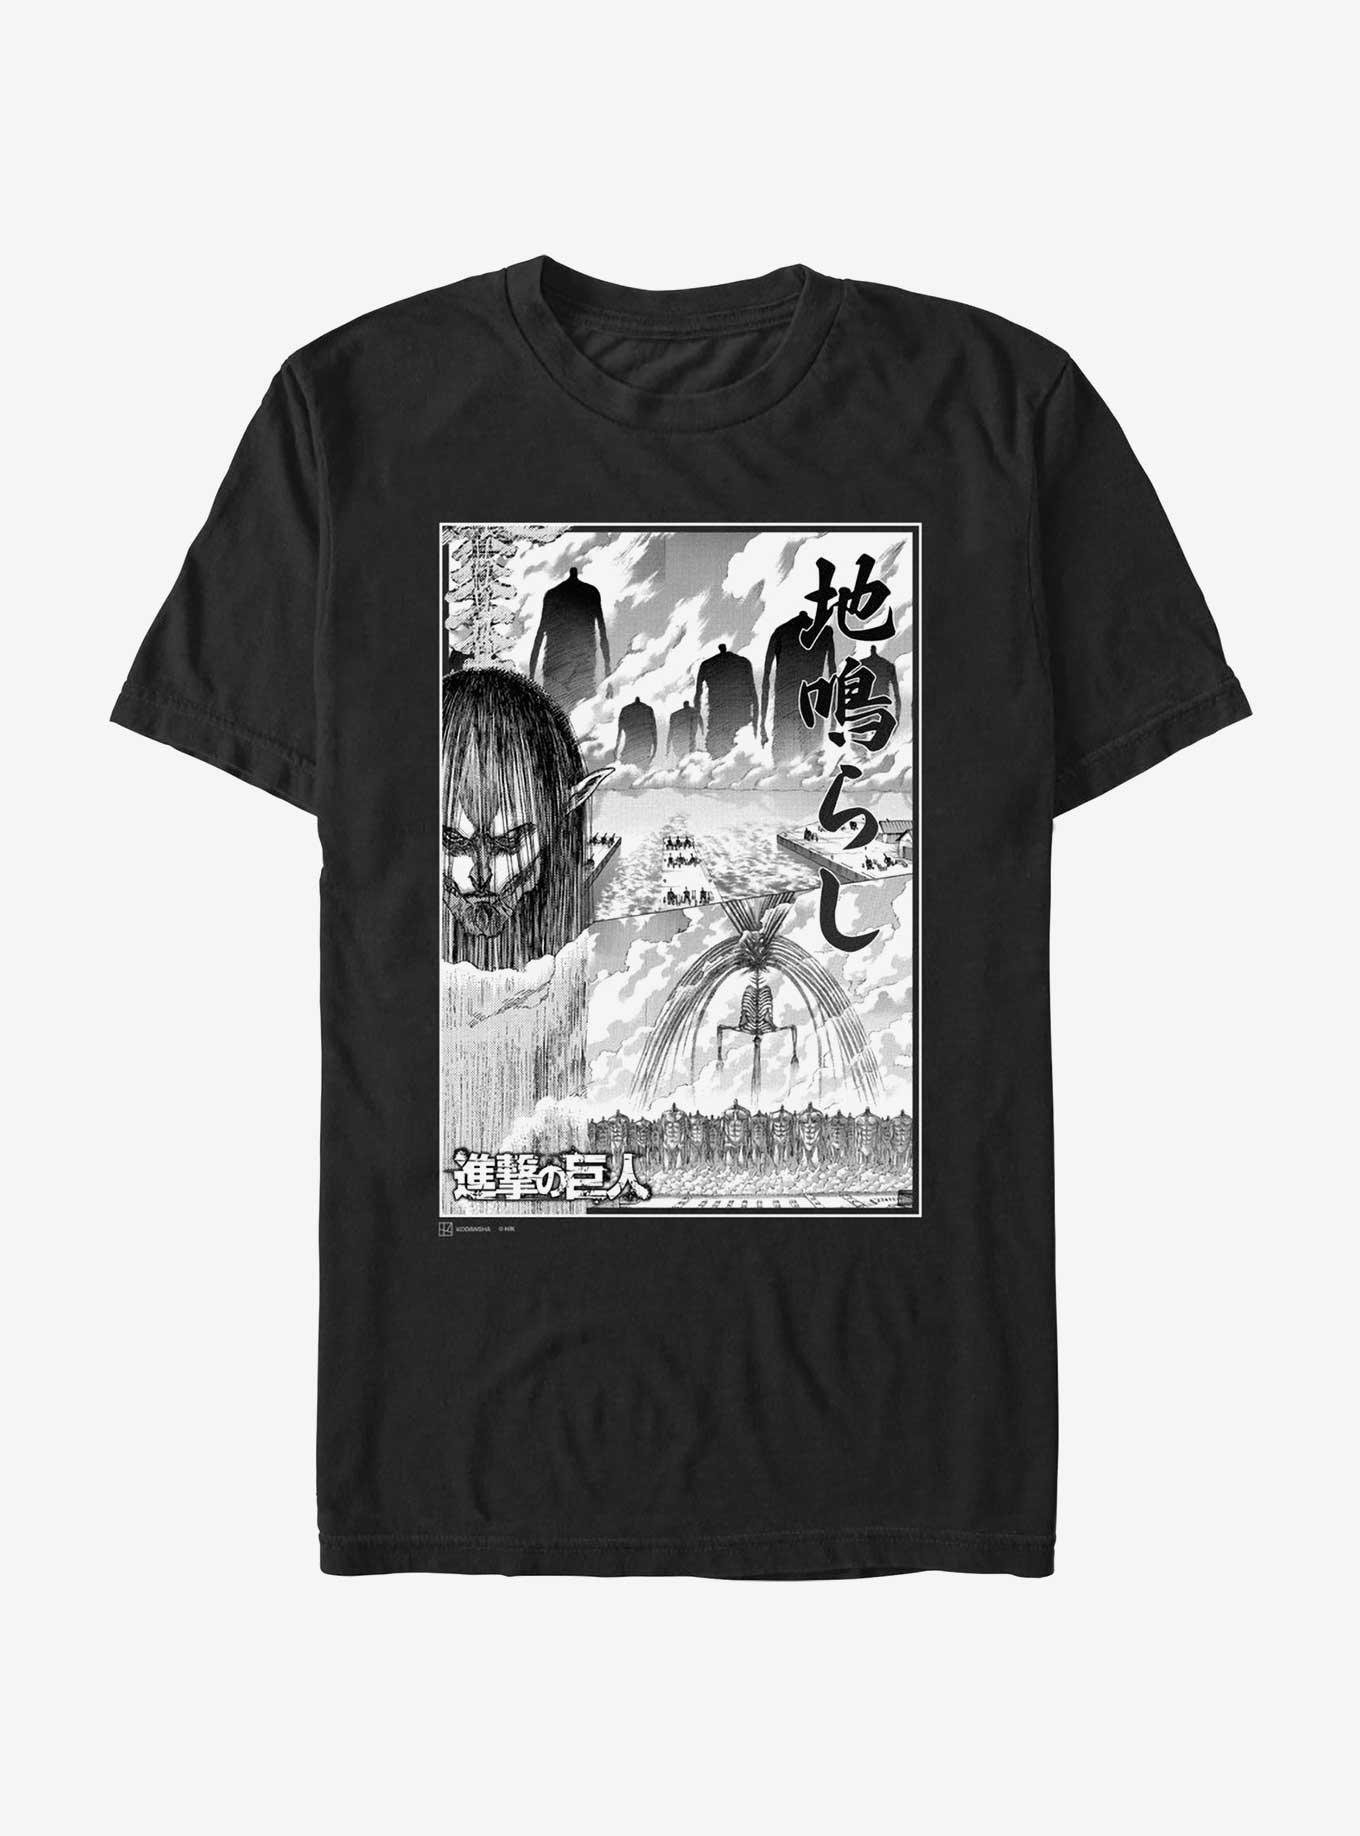 Attack On Titan The Rumbling Collage T-Shirt, BLACK, hi-res